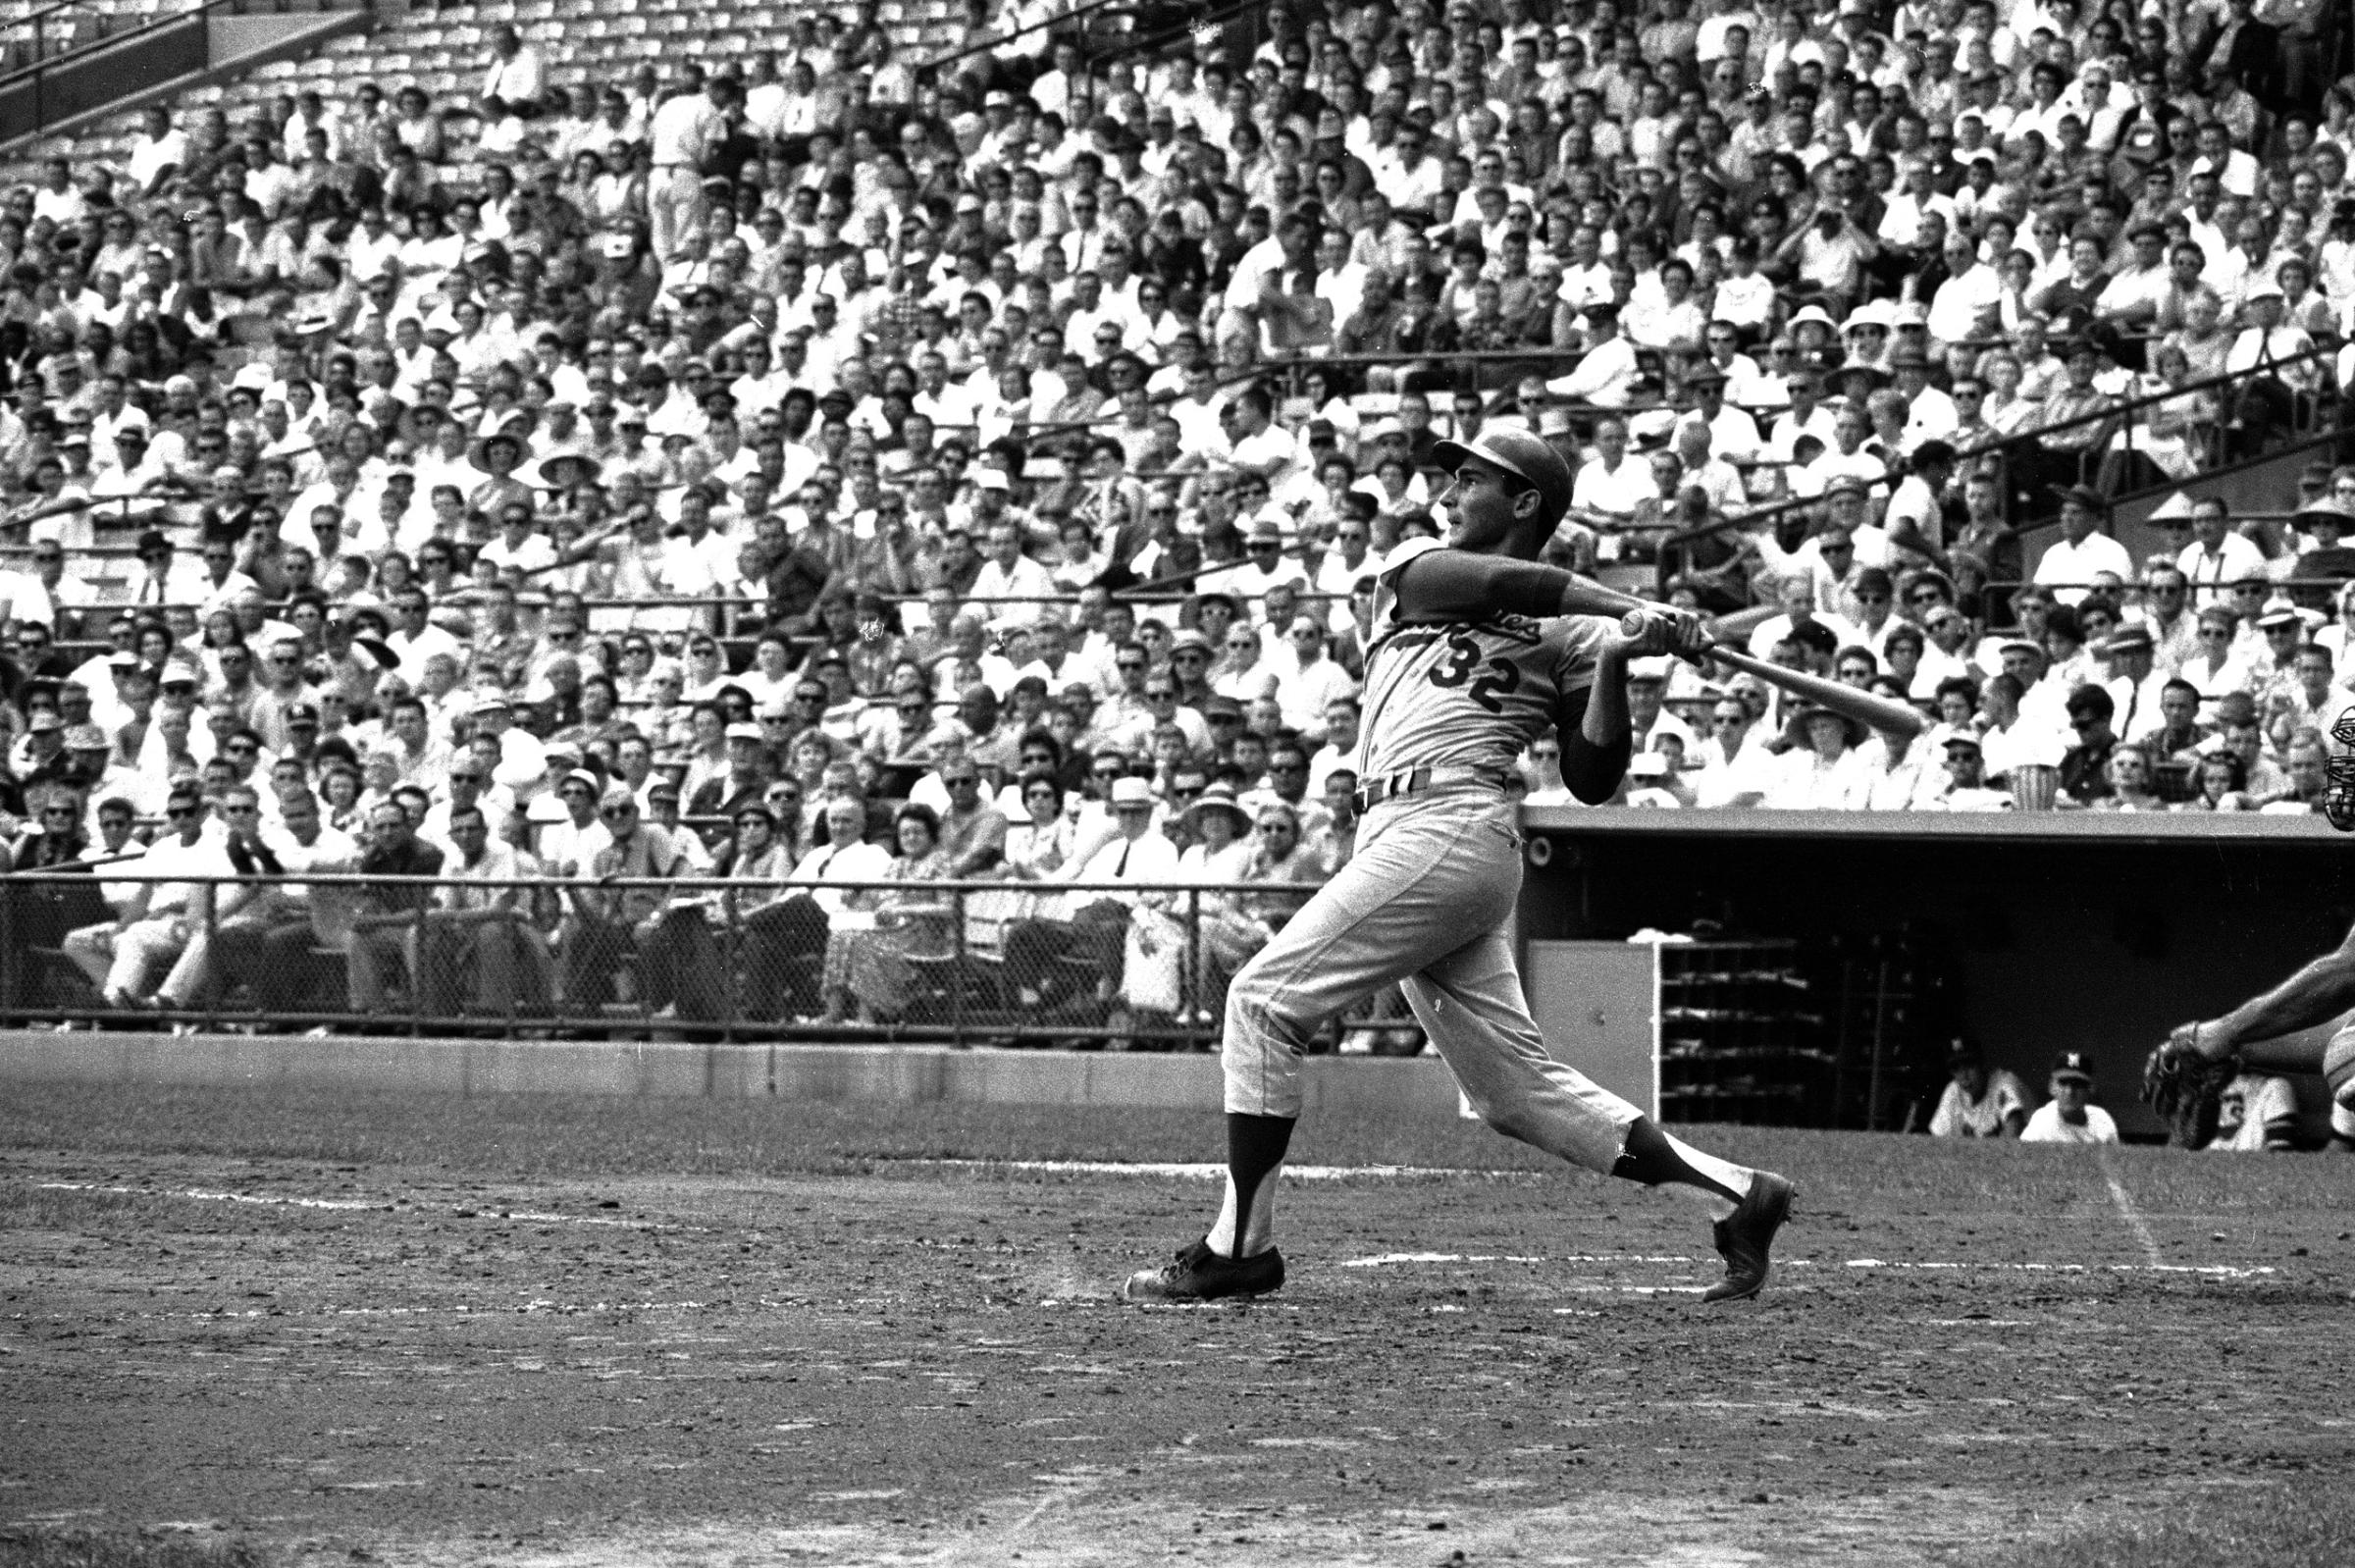 Los Angeles Dodgers pitcher Sandy Koufax at bat during a game against the Milwaukee Braves, 1963.